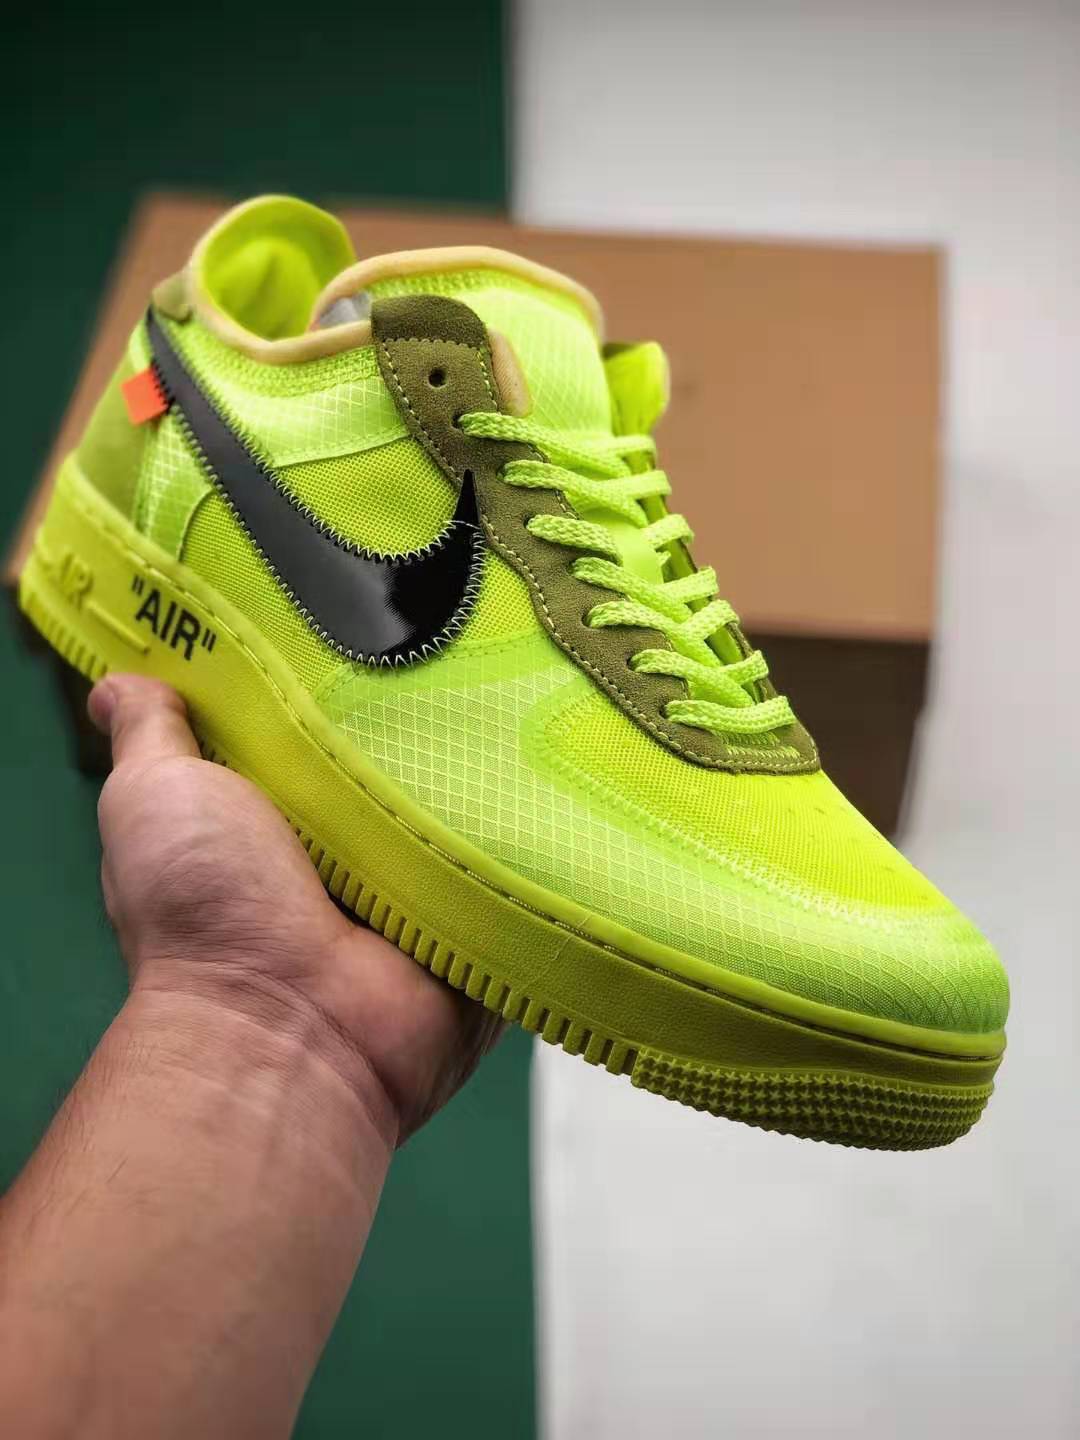 Nike Off-White x Air Force 1 Low 'Volt' AO4606-700 | Limited Edition Sneakers